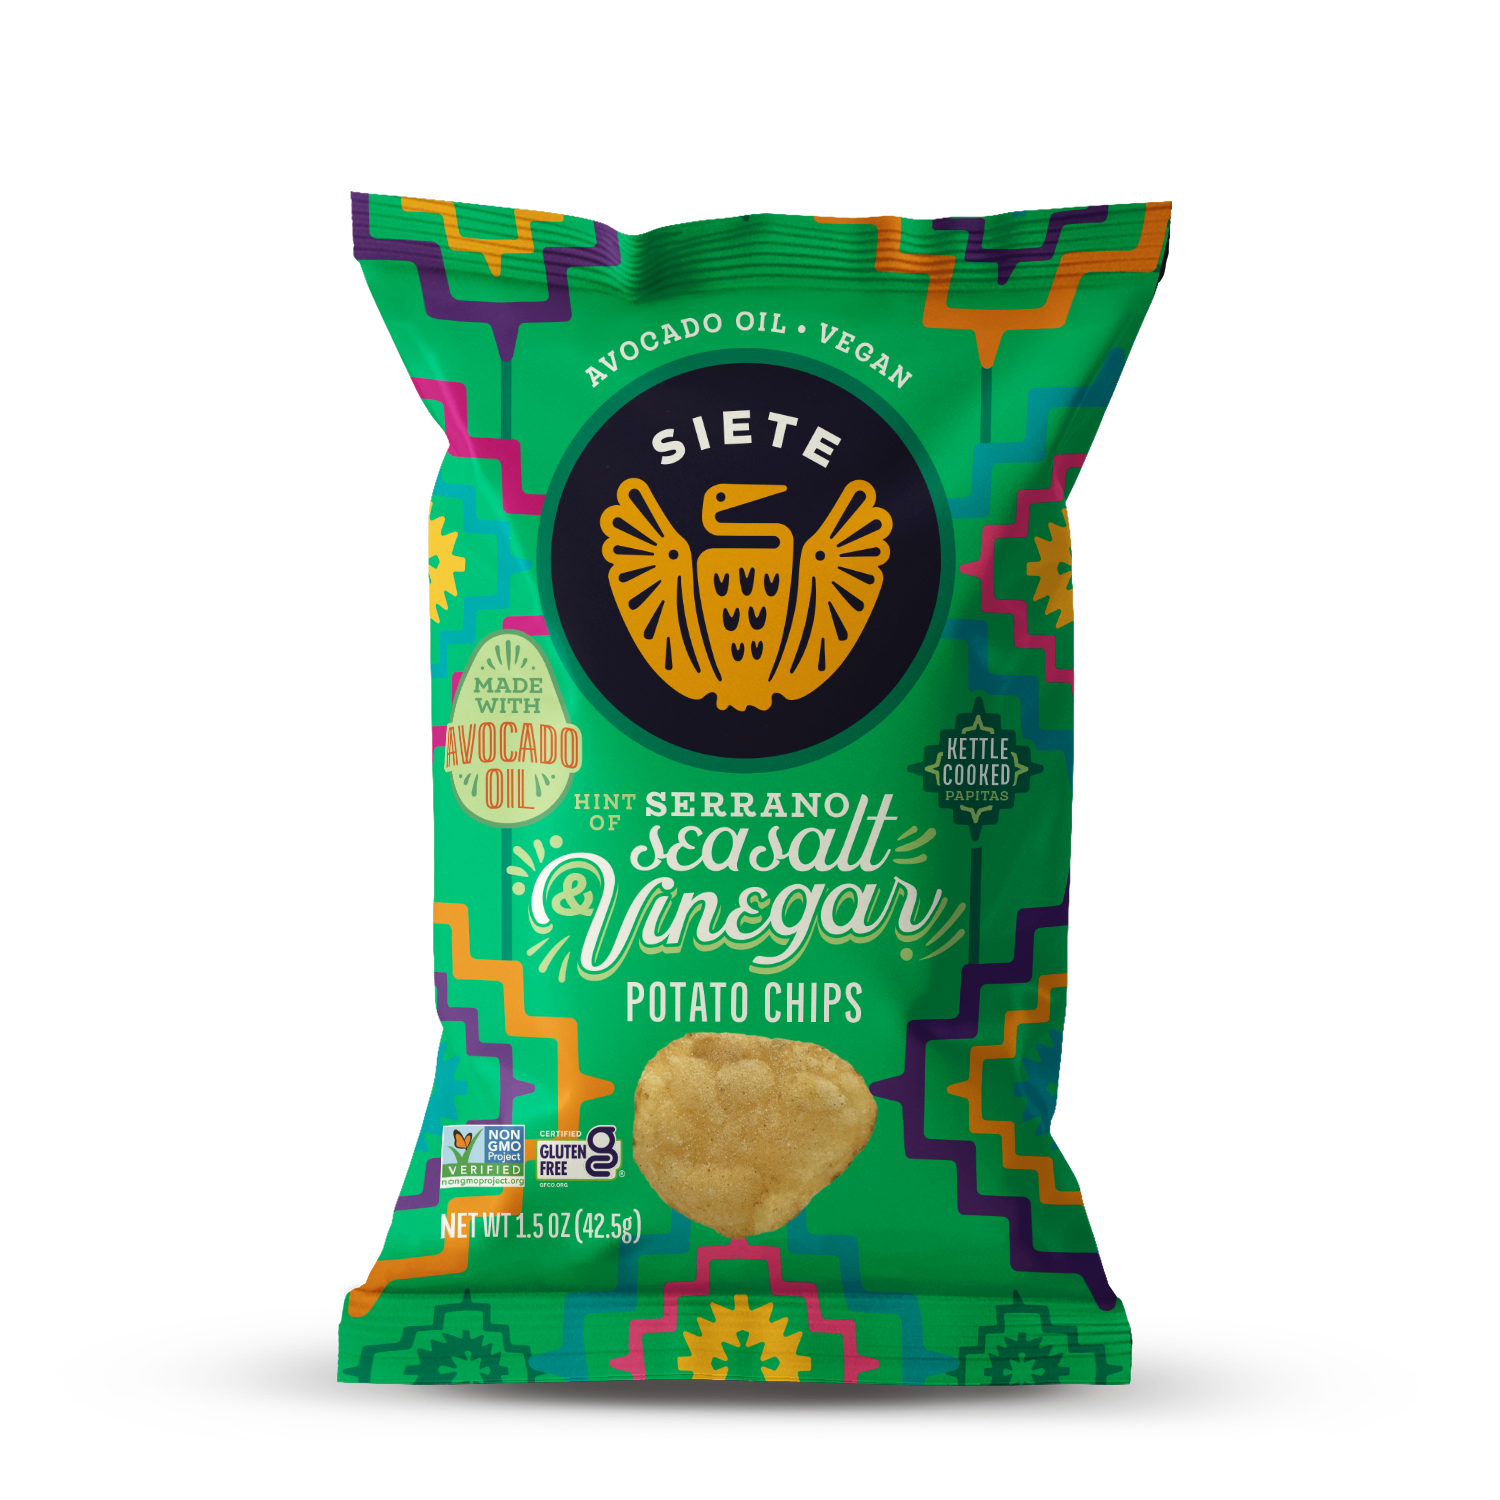 Sea Salt & Vinegar Kettle Cooked Potato Chips with a Hint of Serrano 1.5 oz - 24 bags